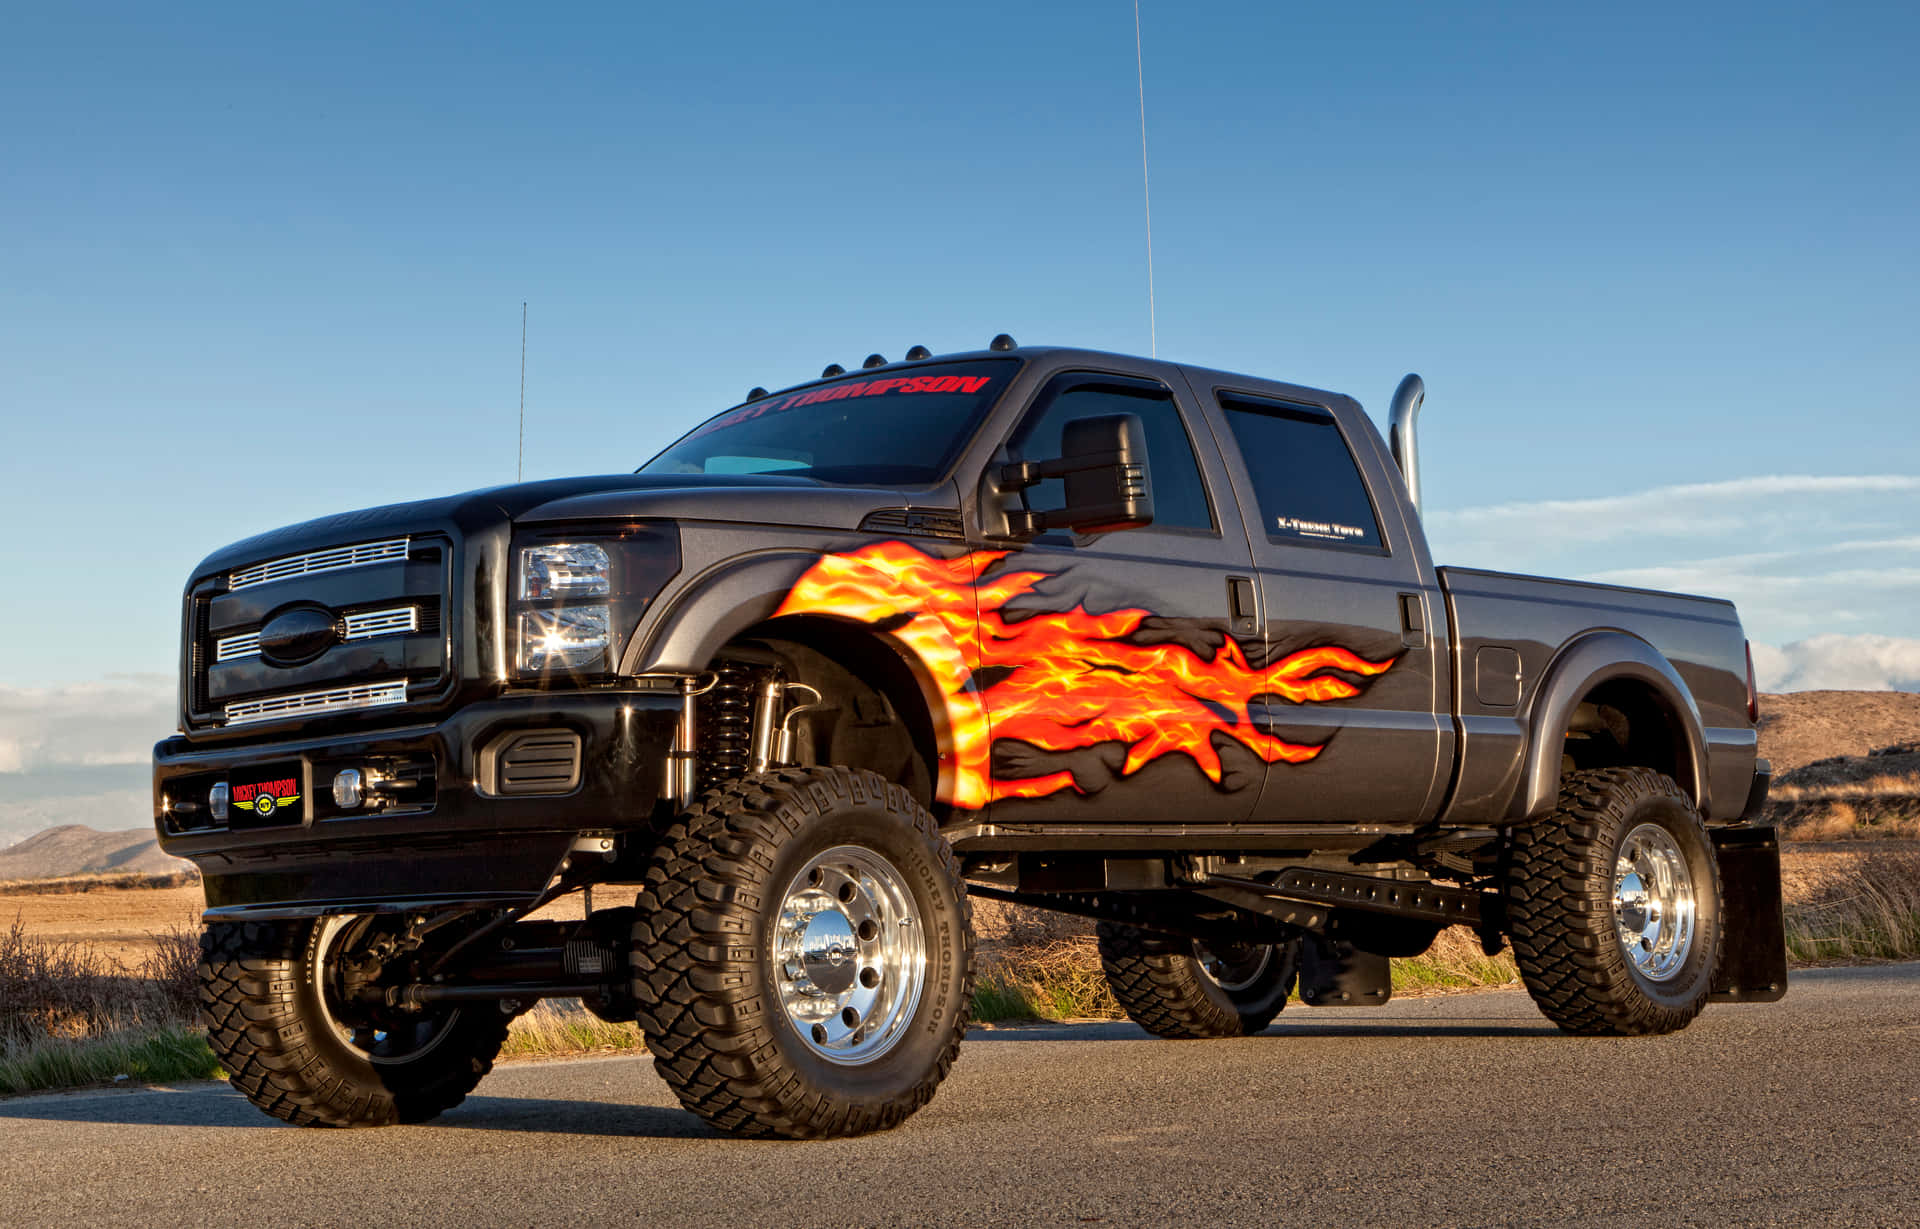 Black red ford takuache truck hd cars Wallpapers  HD Wallpapers  ID 41926